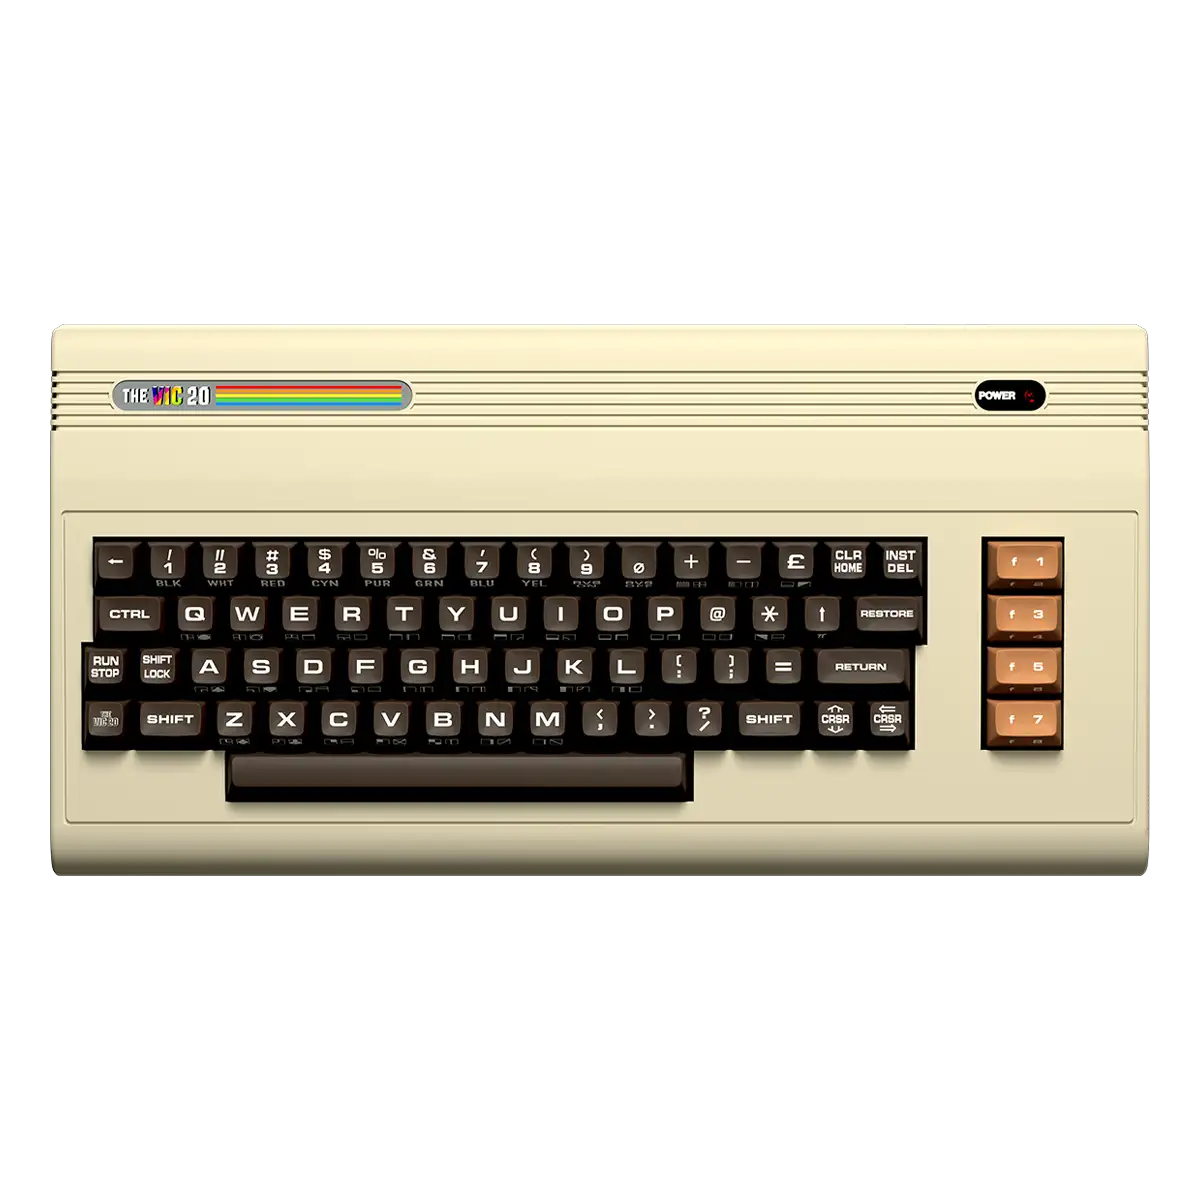 THE VIC 20 - Limited Edition C64 Image 4